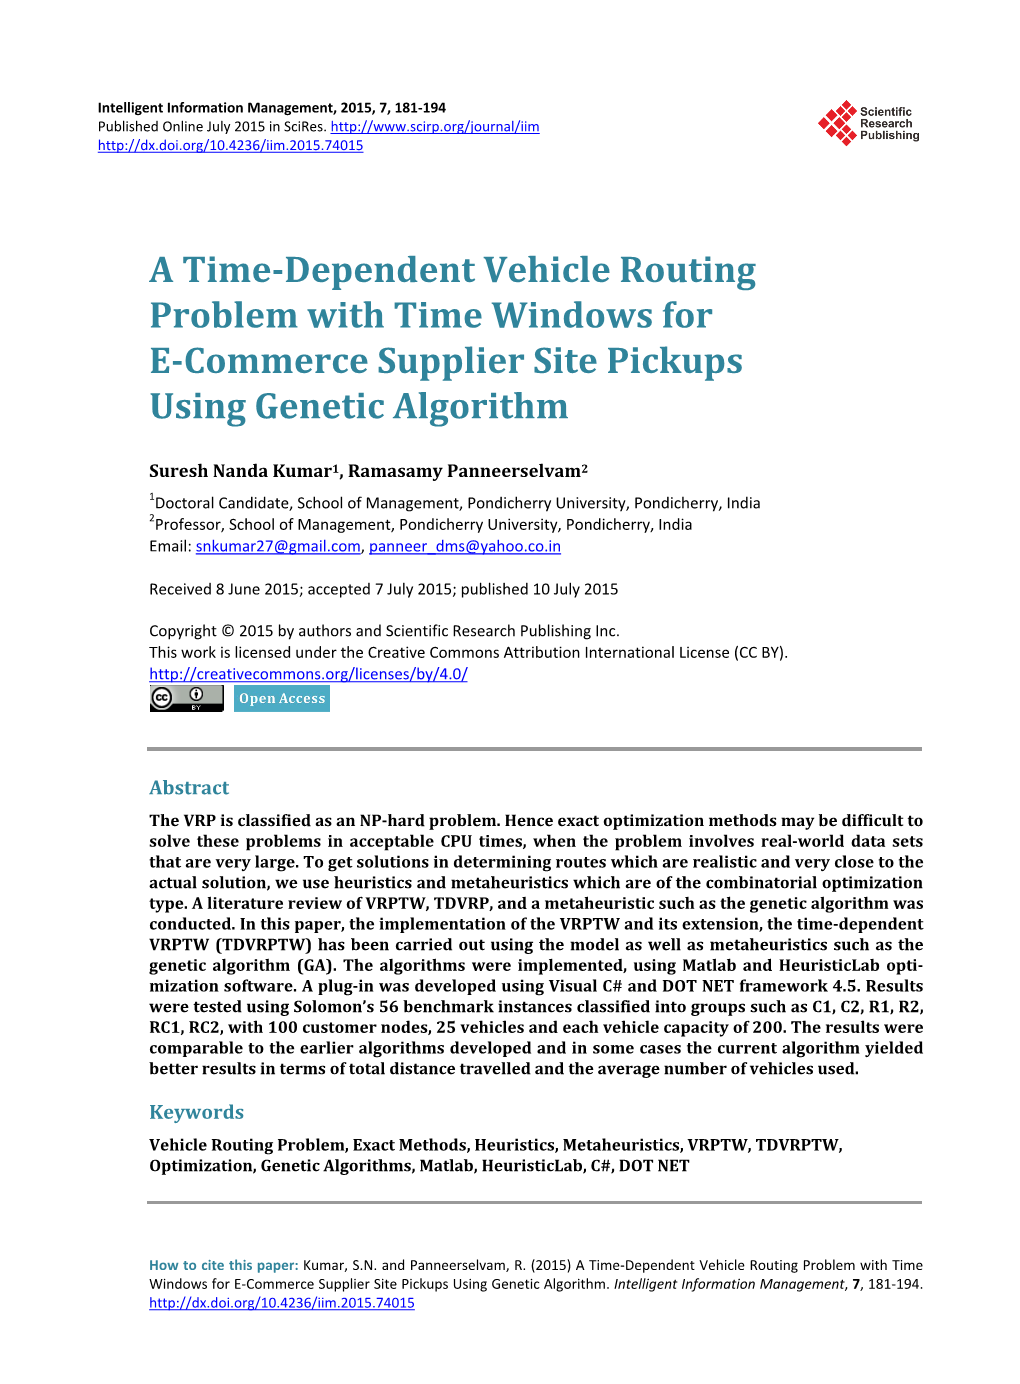 A Time-Dependent Vehicle Routing Problem with Time Windows for E-Commerce Supplier Site Pickups Using Genetic Algorithm